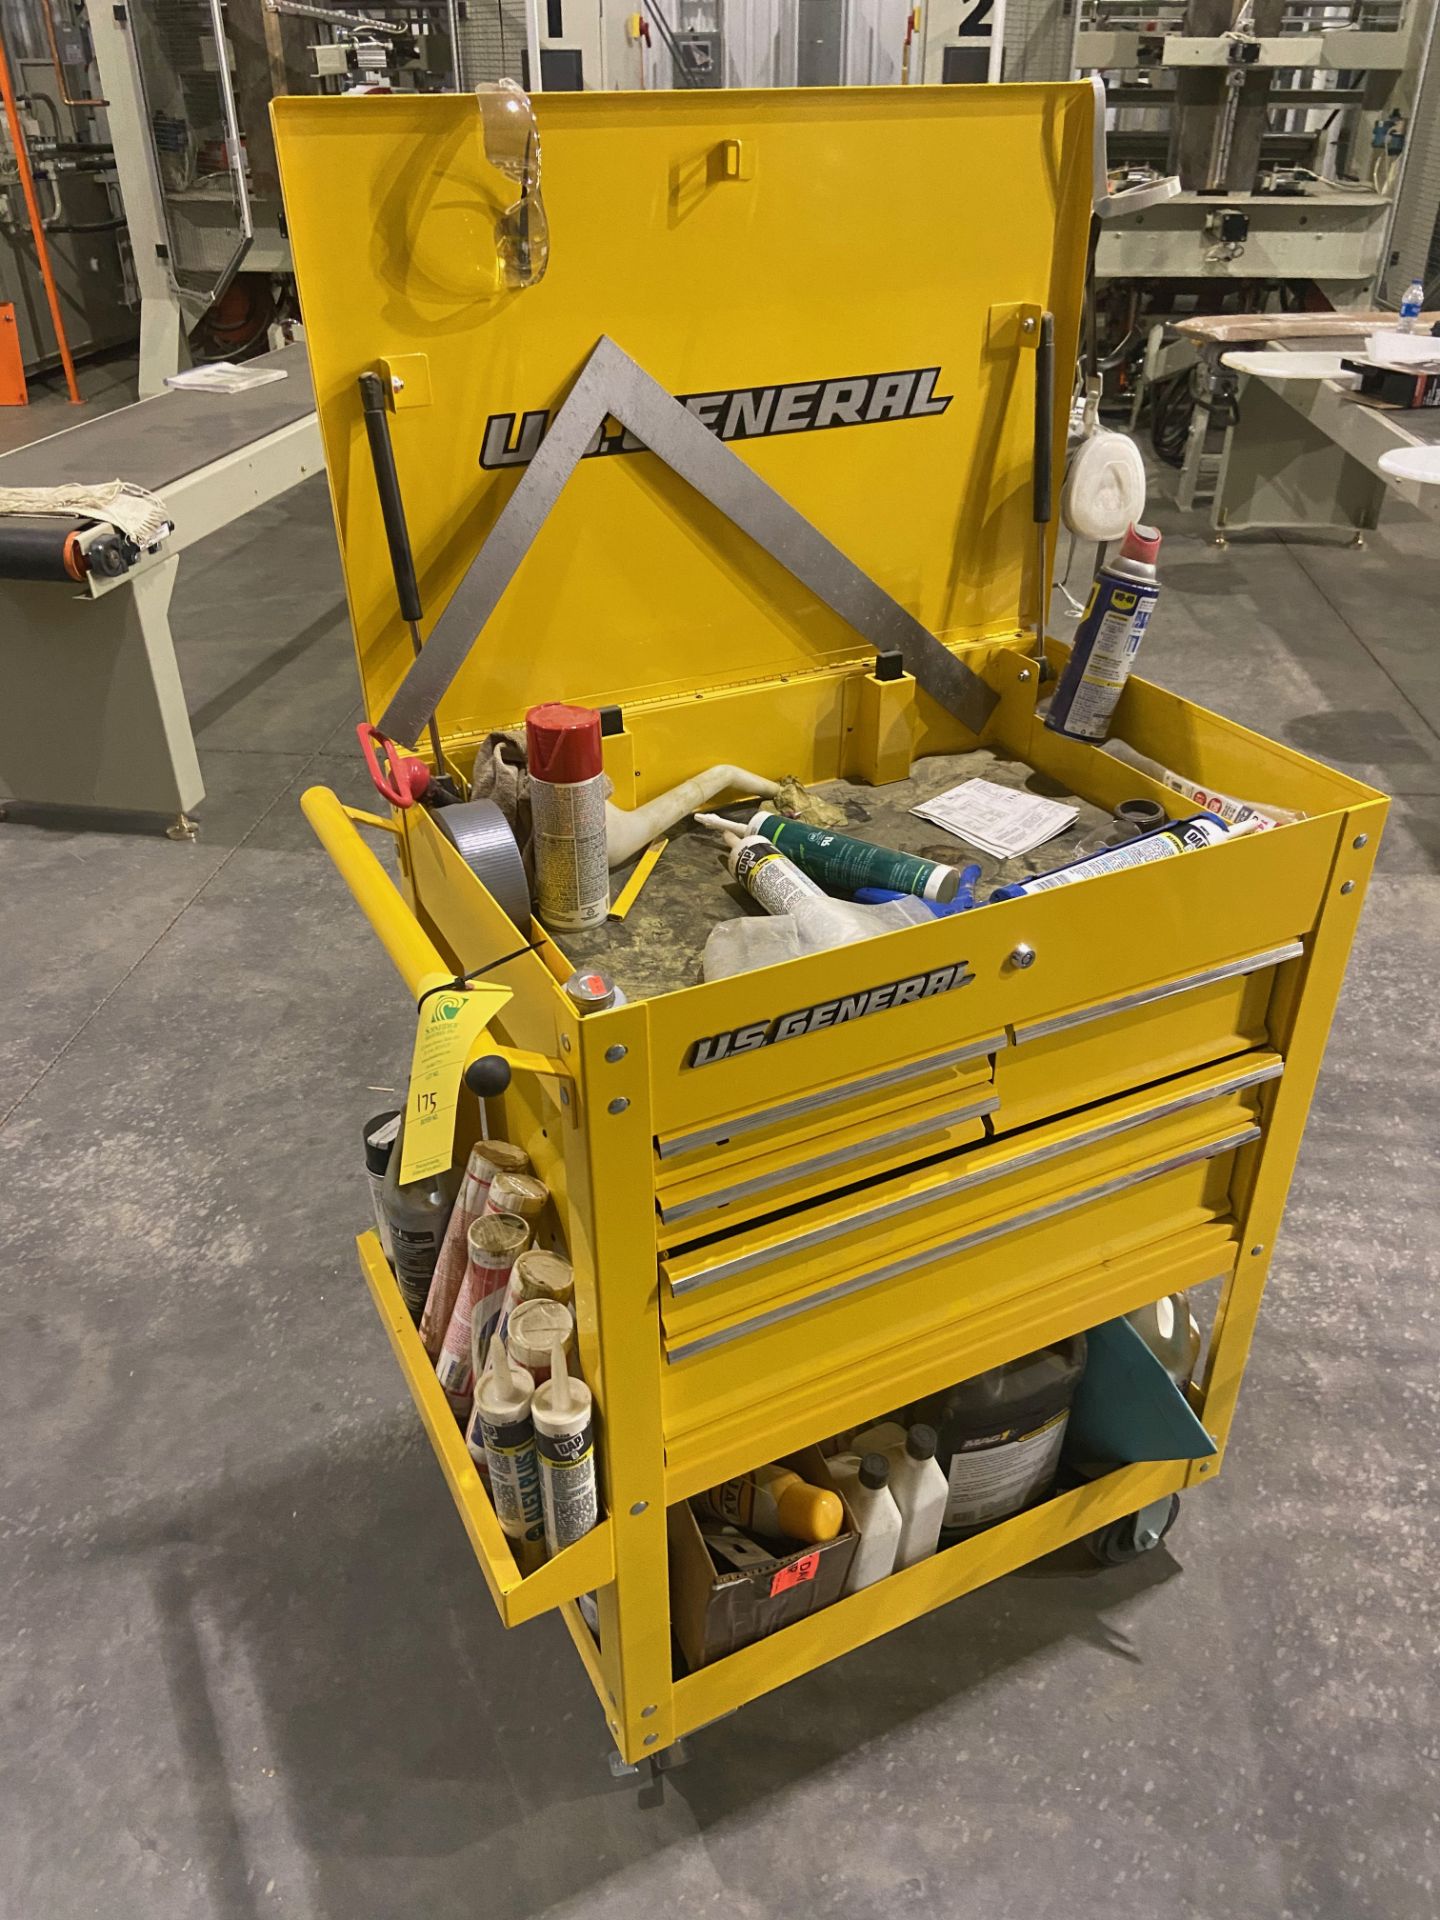 U.S. General Mechanic's Cart on Casters and Contents, 30", 5 Drawer, Rigging Fee: $20 - Image 2 of 6